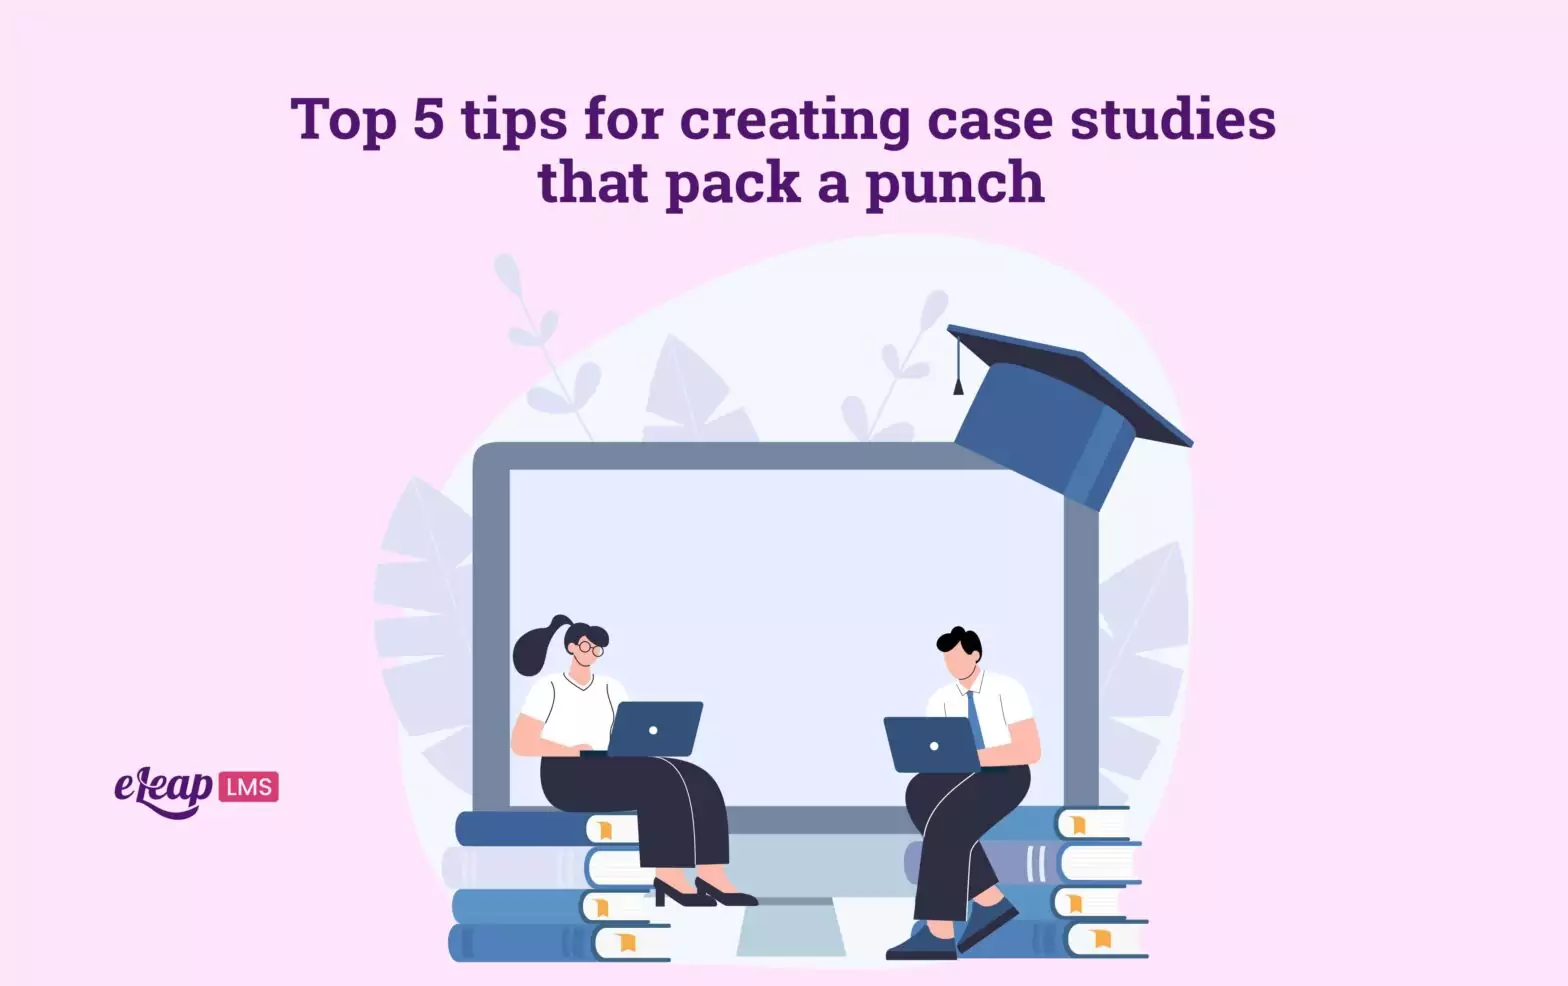 Top 5 tips for creating case studies that pack a punch